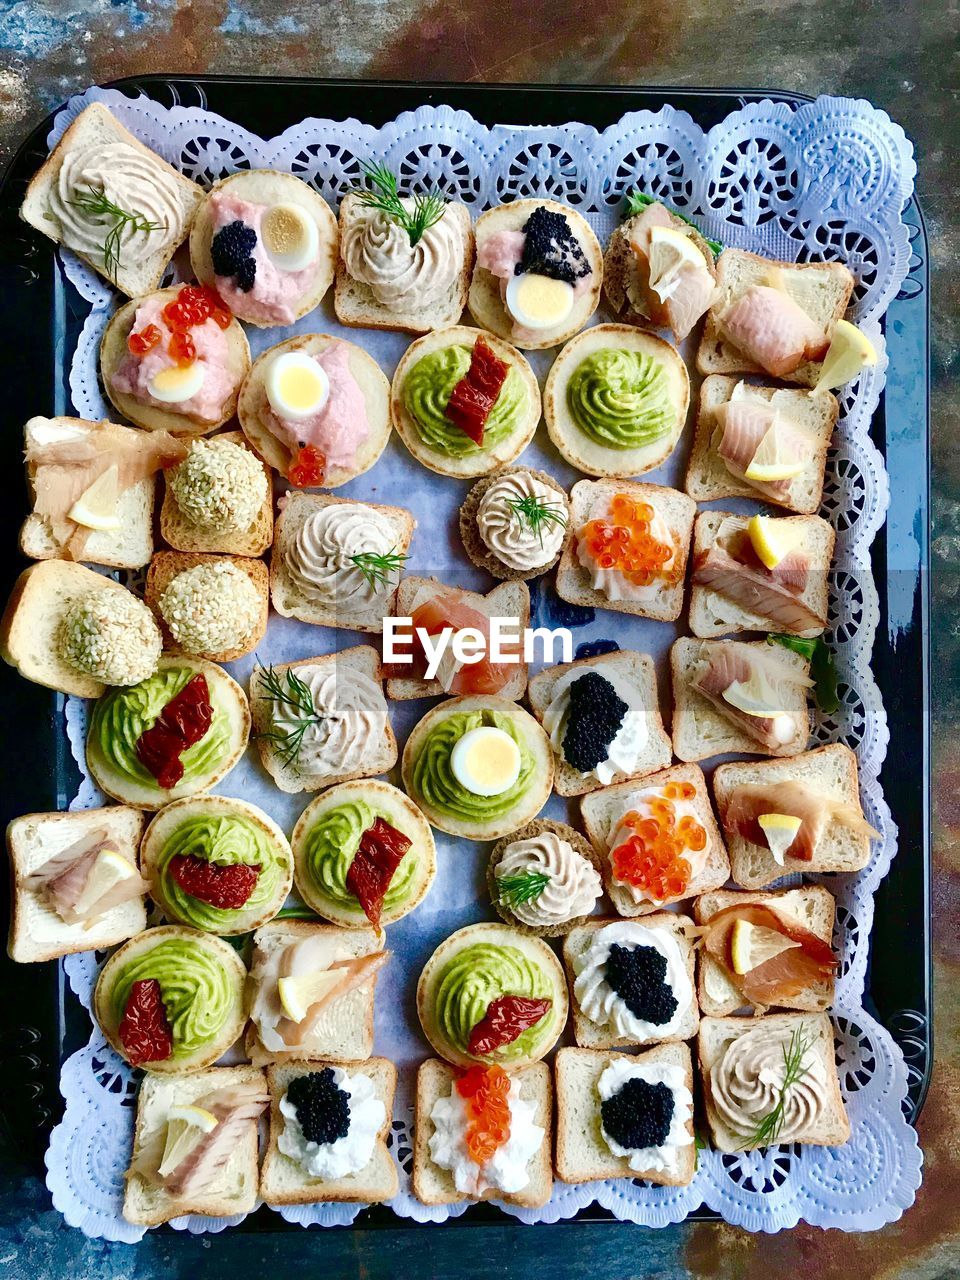 HIGH ANGLE VIEW OF SUSHI ON PLATE